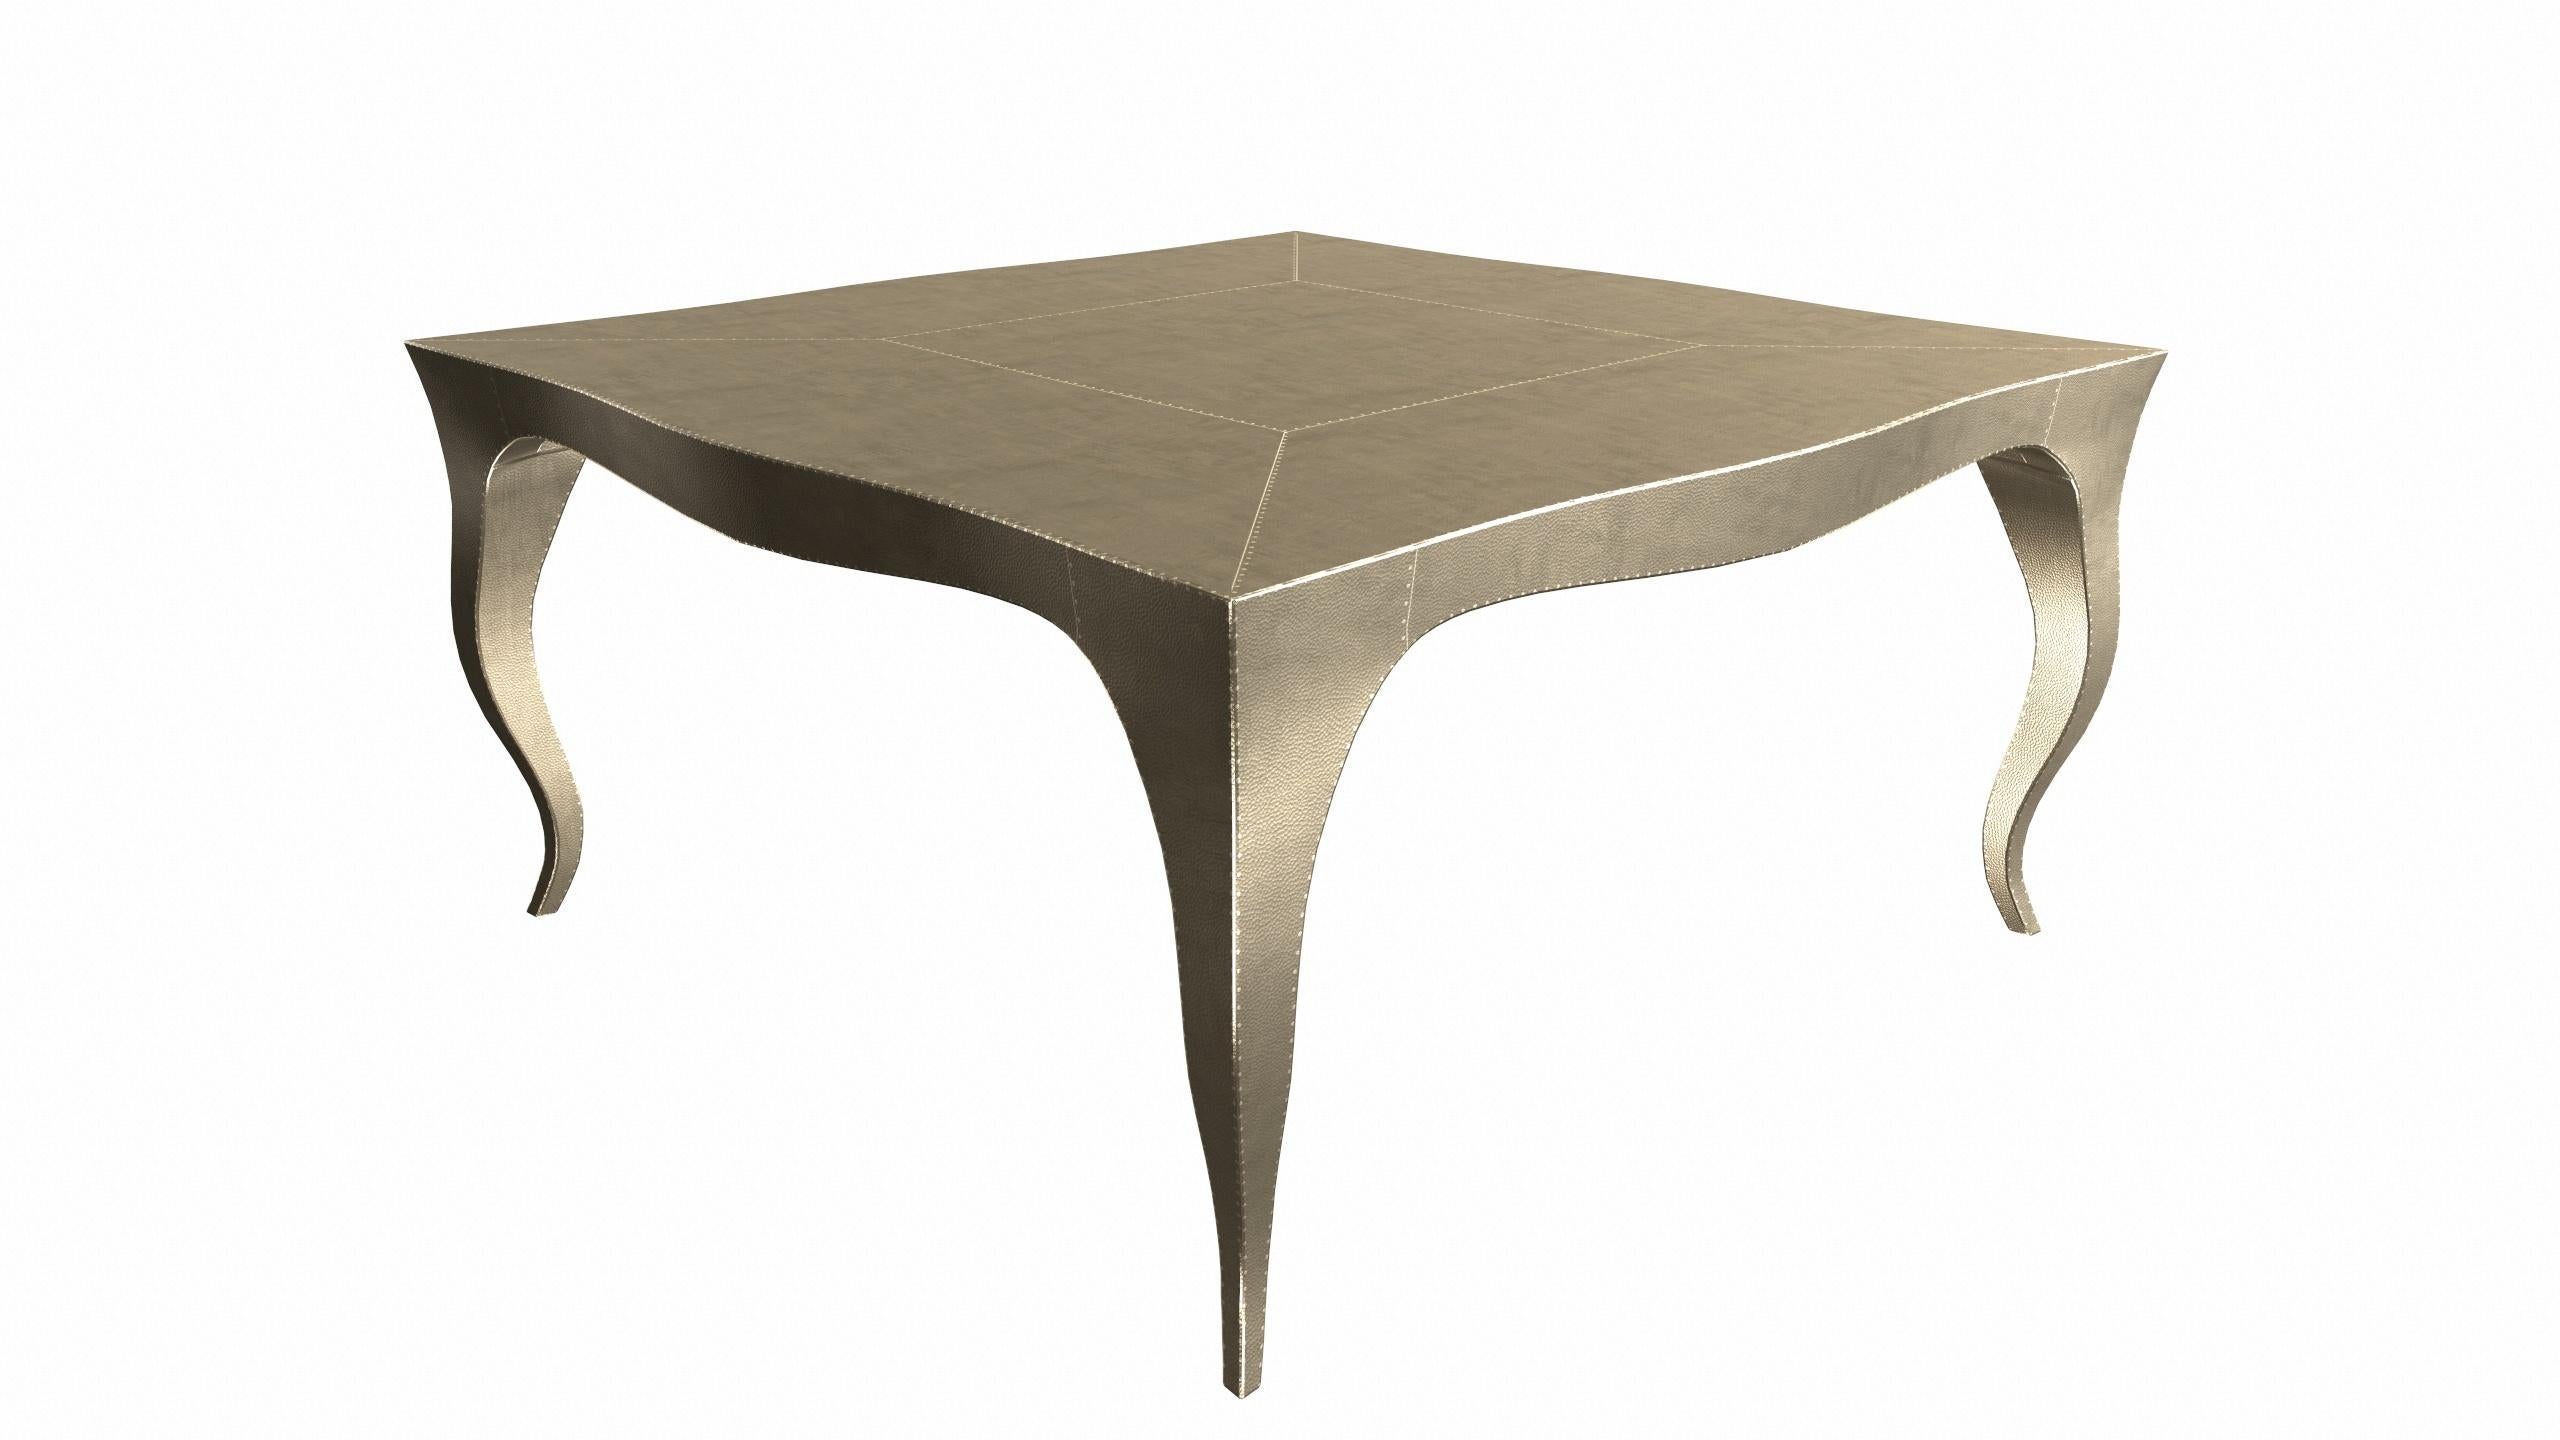 Other Louise Art Deco Industrial and Work Tables Mid. Hammered Brass 18.5x18.5x10 inch For Sale